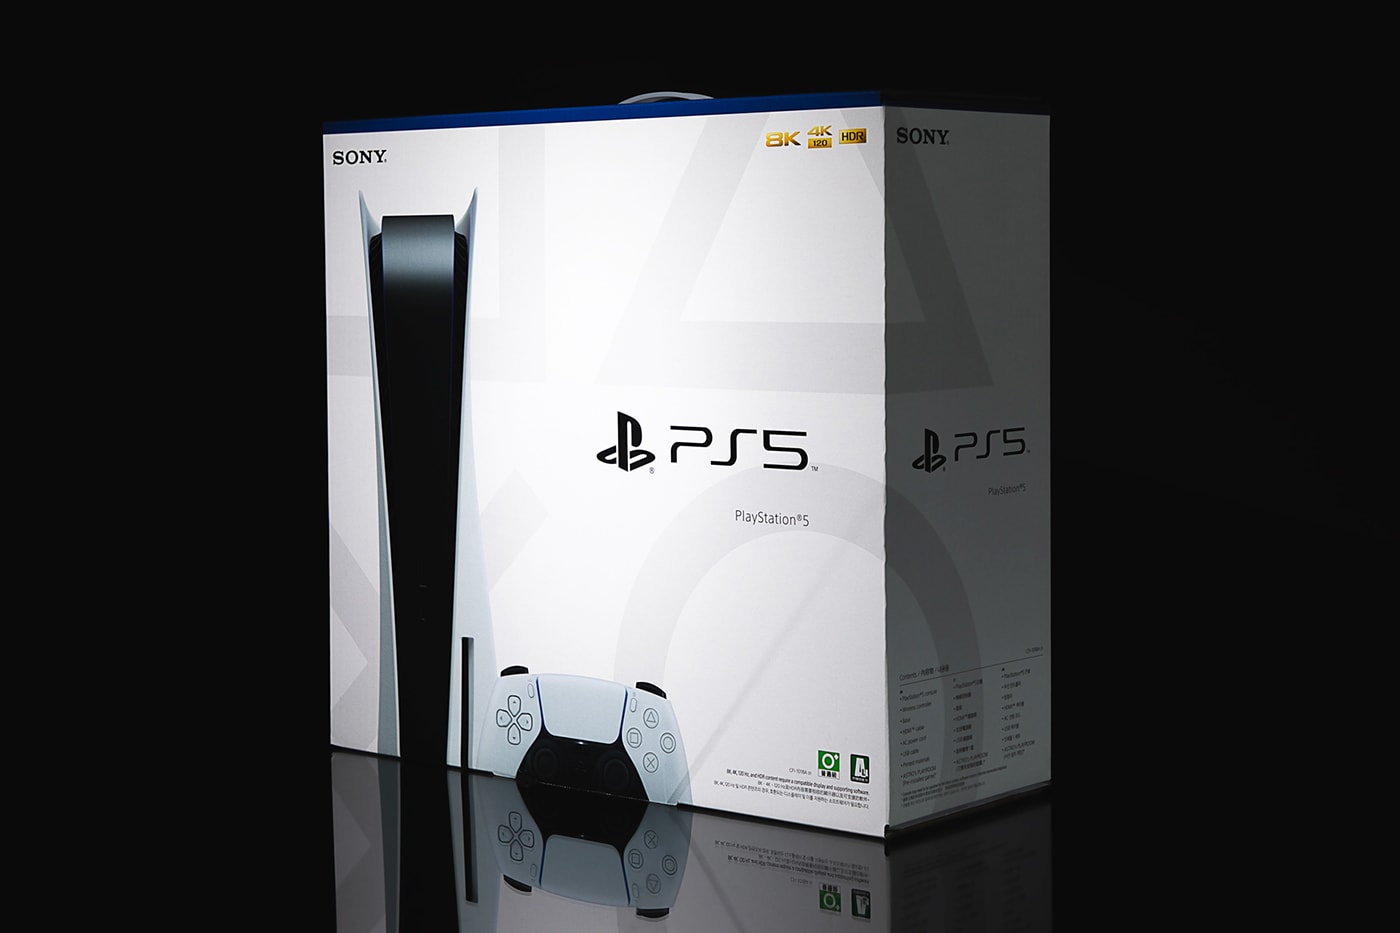 Sony PlayStation 5 Closer Look Release Info Buy Price Where Specs Review Spider Man Games New Ultra HD Blu-Ray Disc Drive Digital Edition